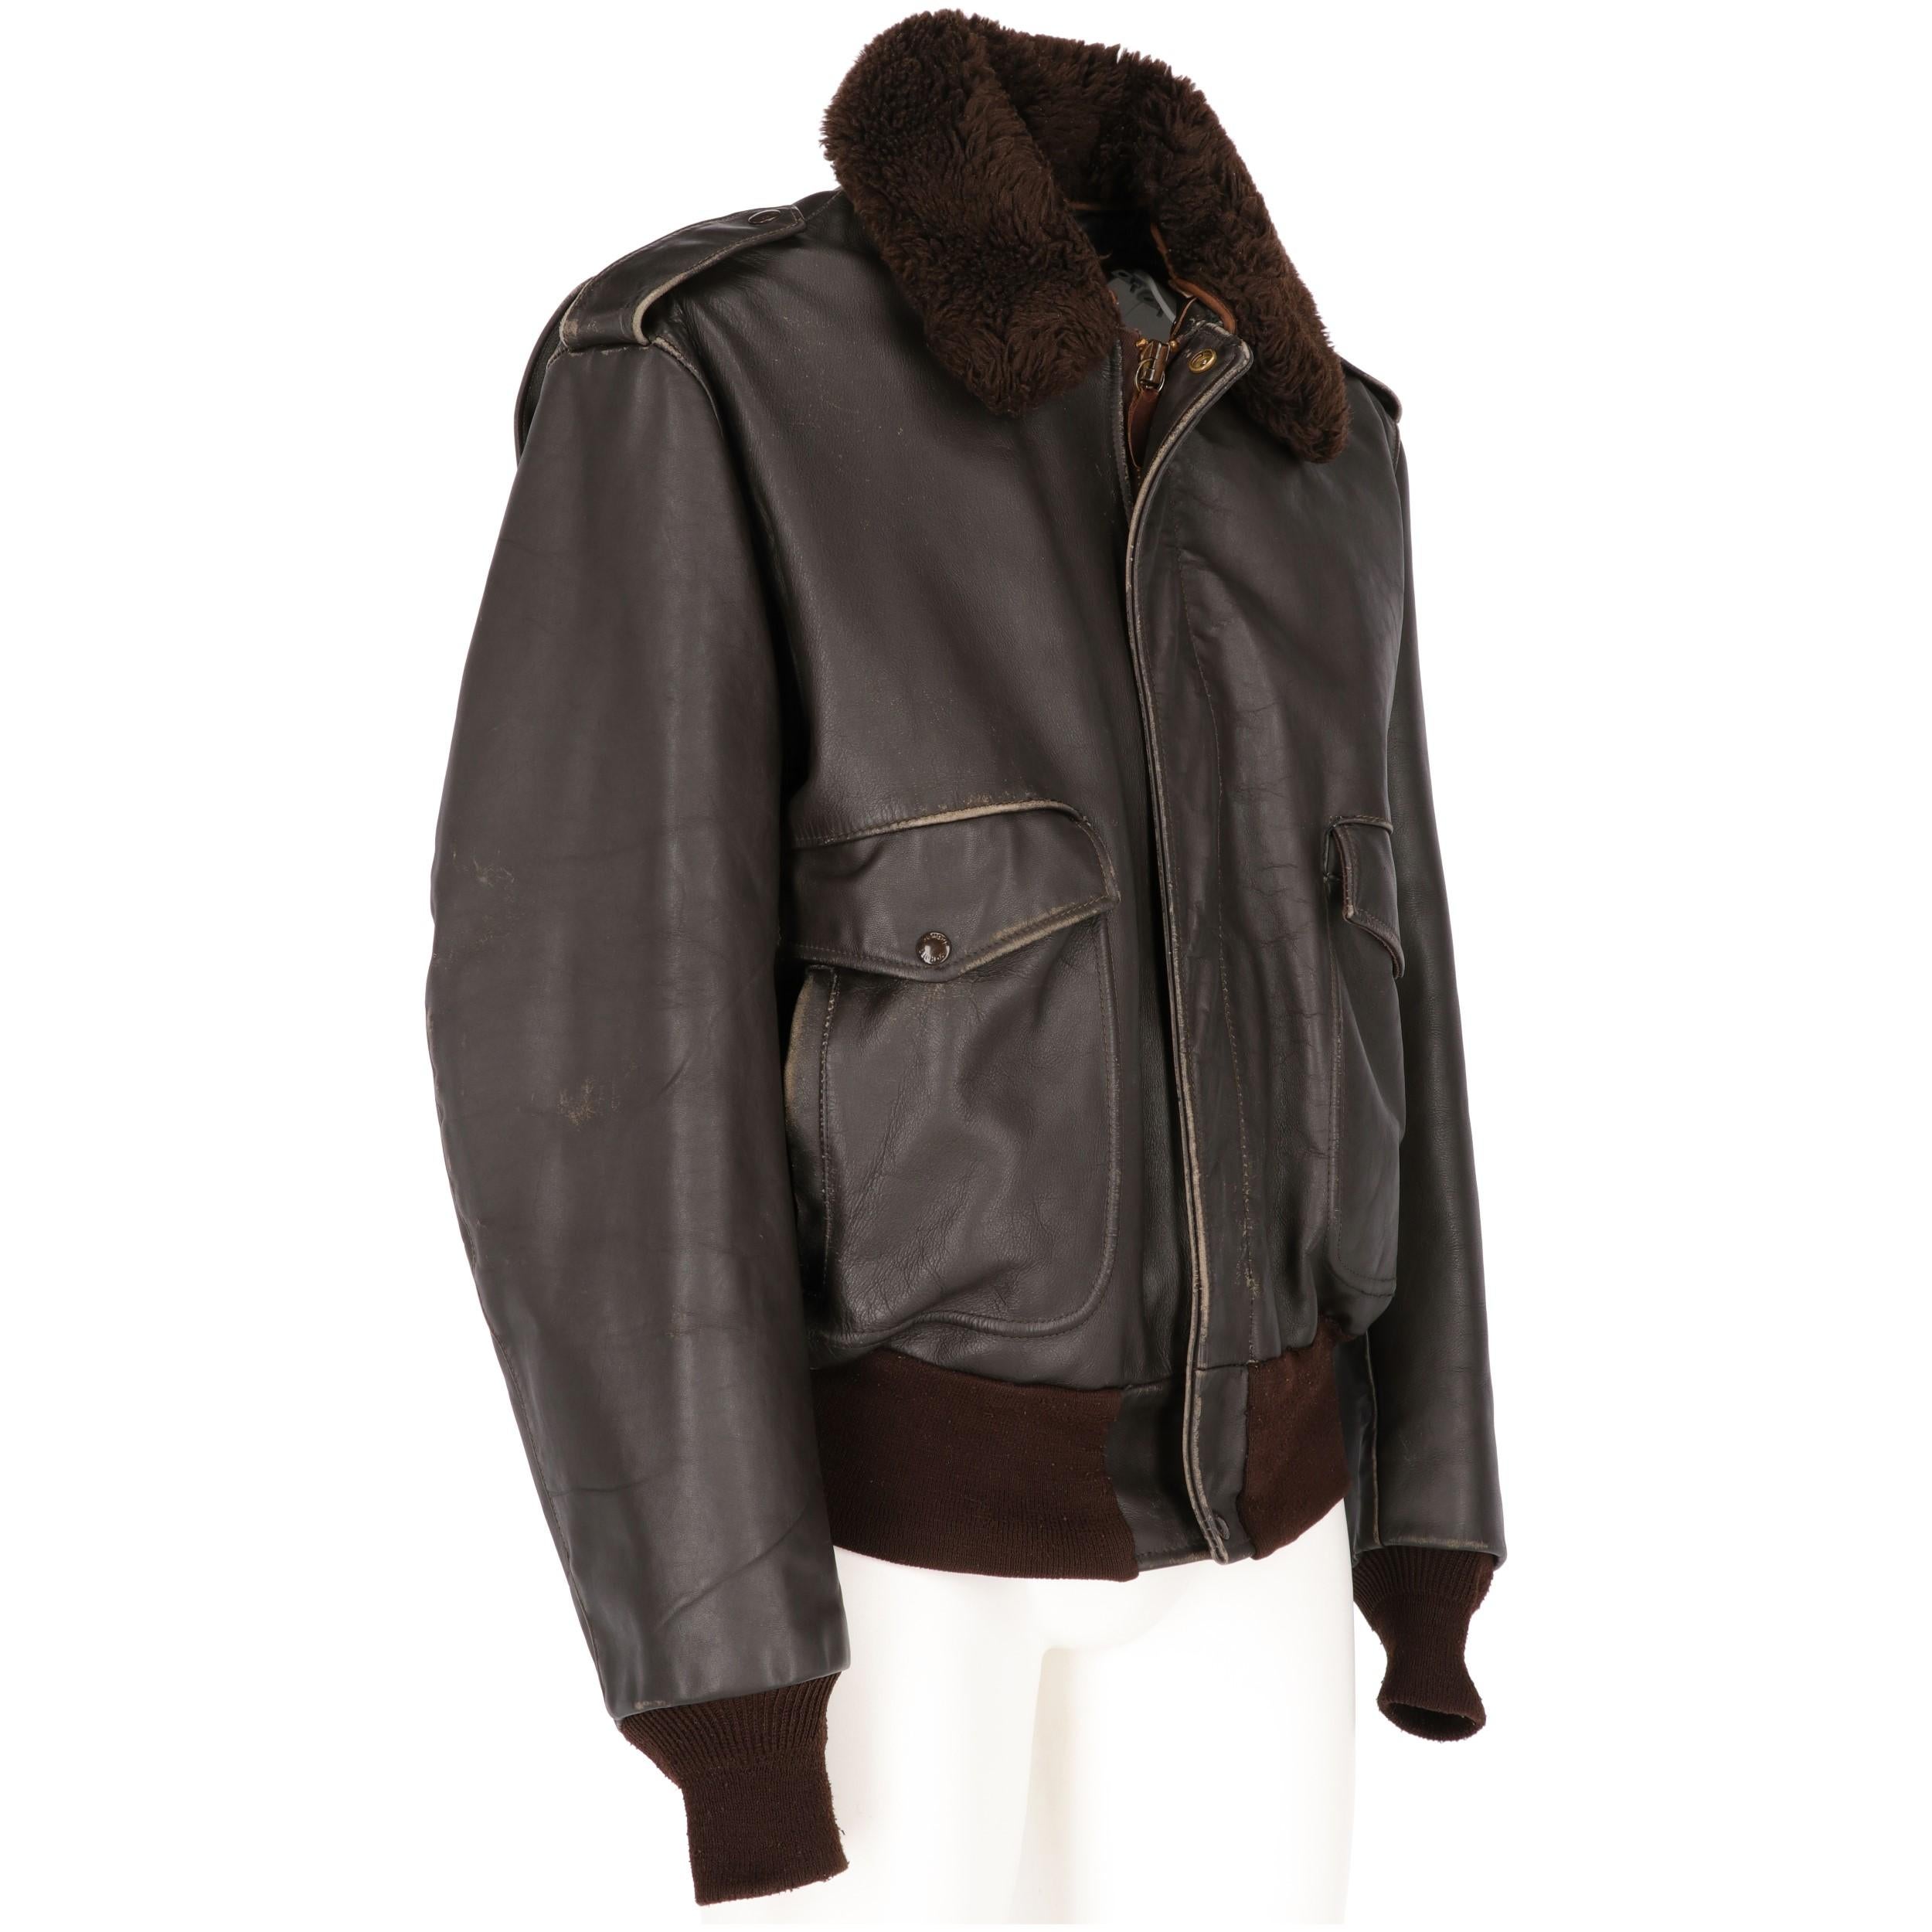 Schott USA dark brown genuine leather jacket with removable fake fur collar, epaulettes with press studs, lightly puff sleeves and ribbed elastic brown cotton cuffs, front fastening with bronze-tone metal thick zip and leather puller, one press stud